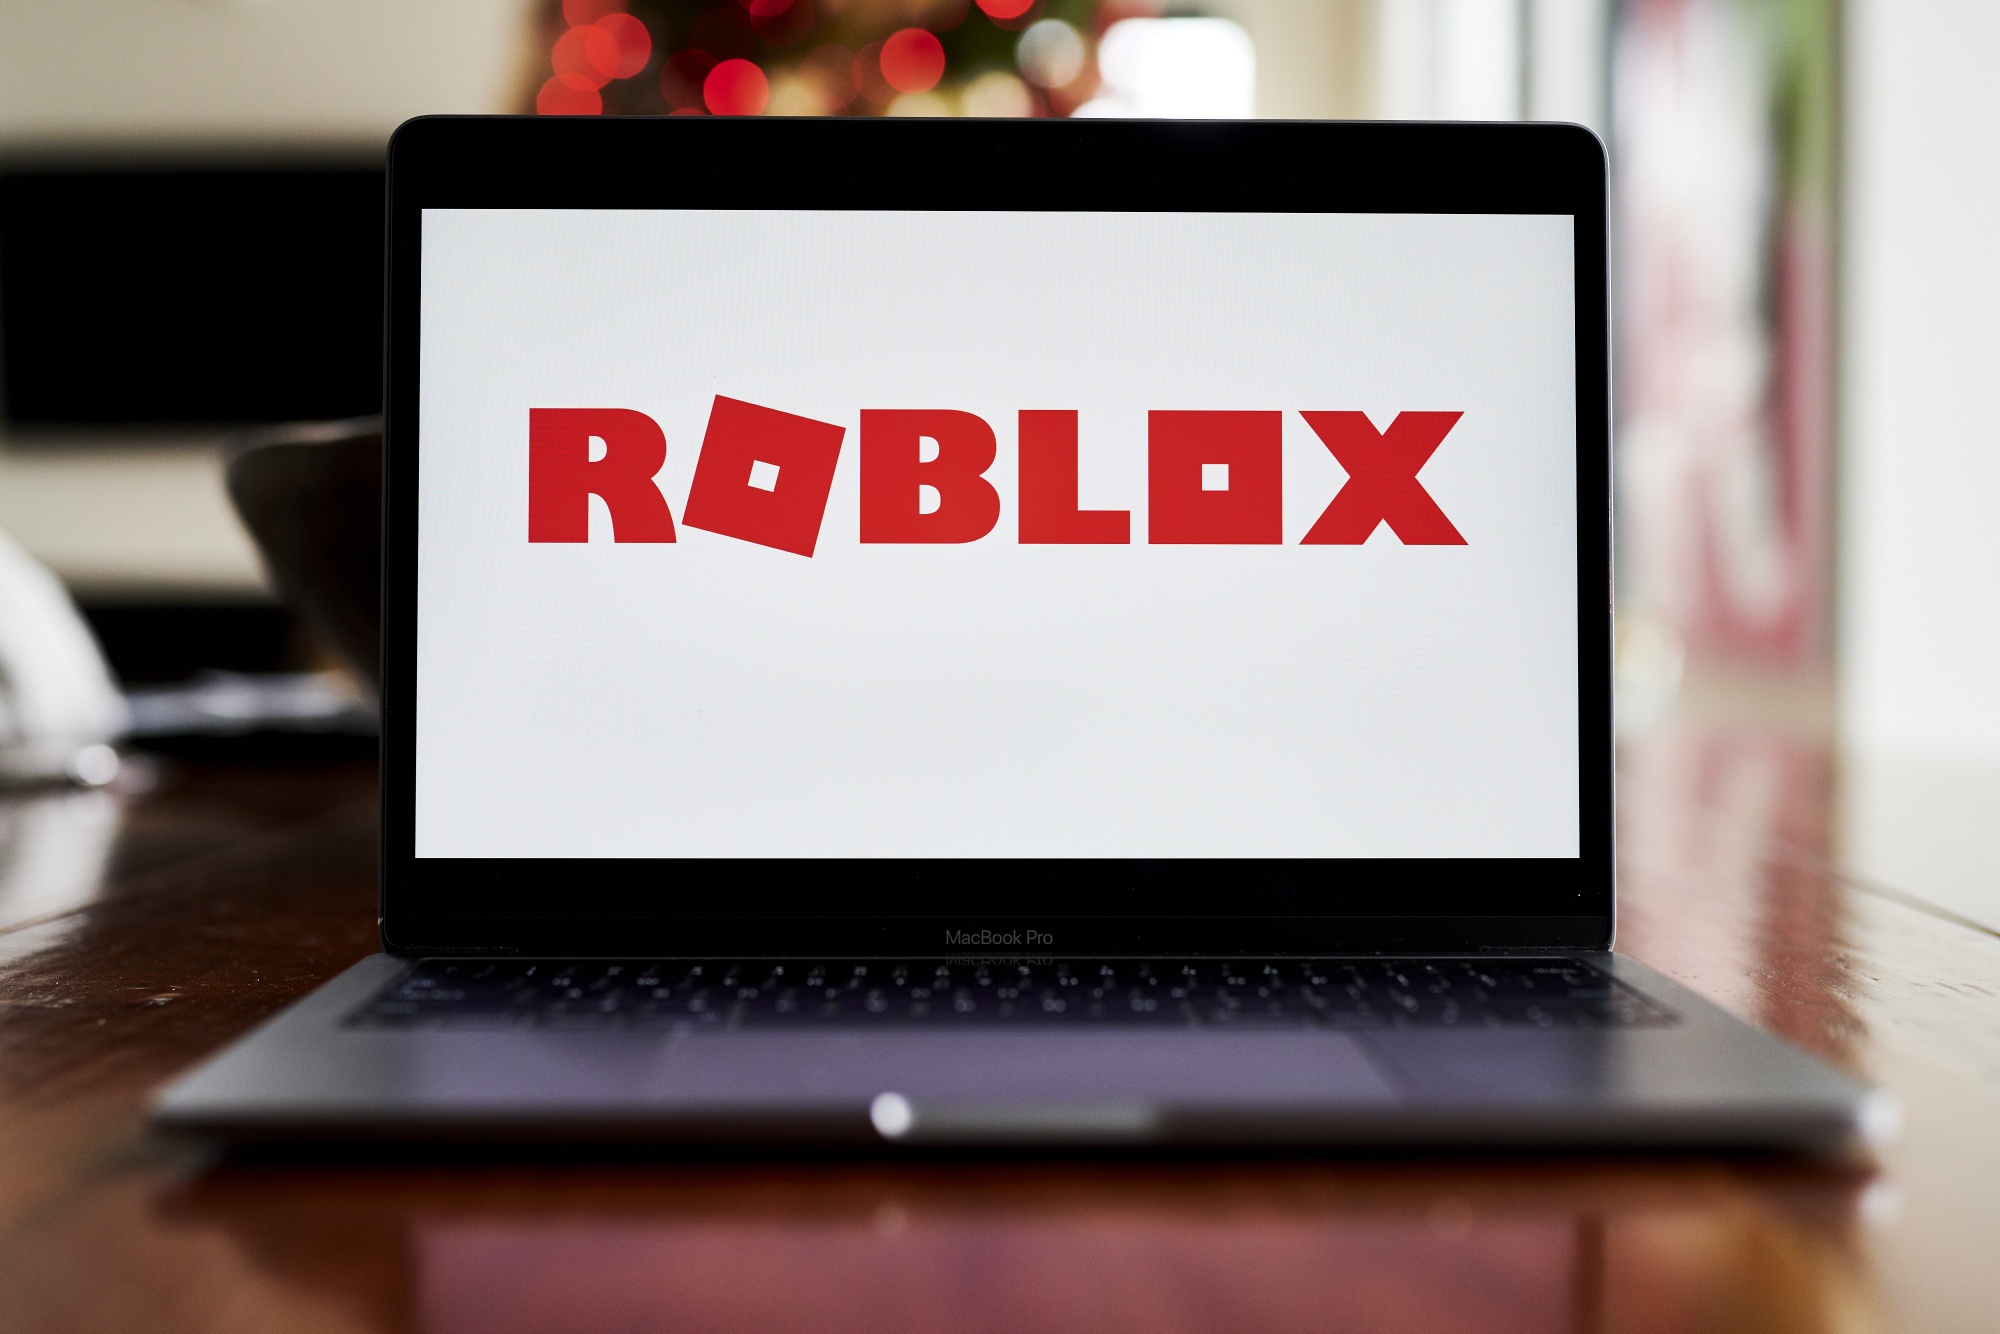 Full interview with Roblox CEO David Baszucki on going public through a  direct listing